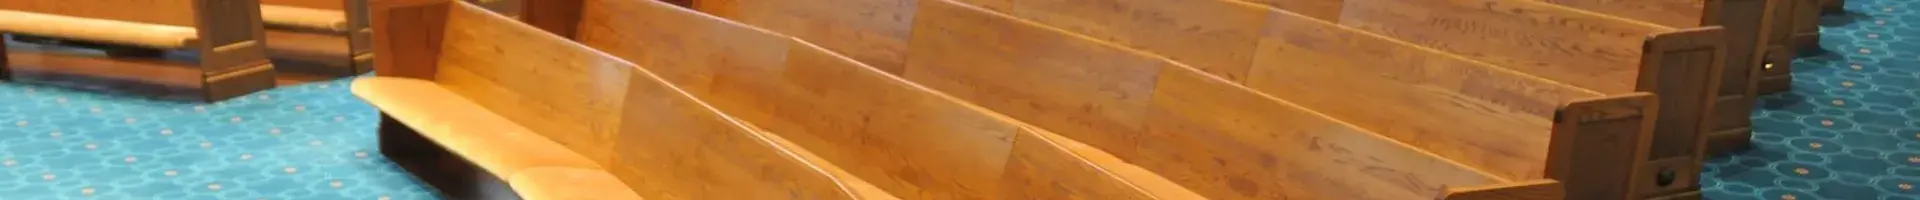 The Inside of a Church Building with Clean Pews and Clean Floors